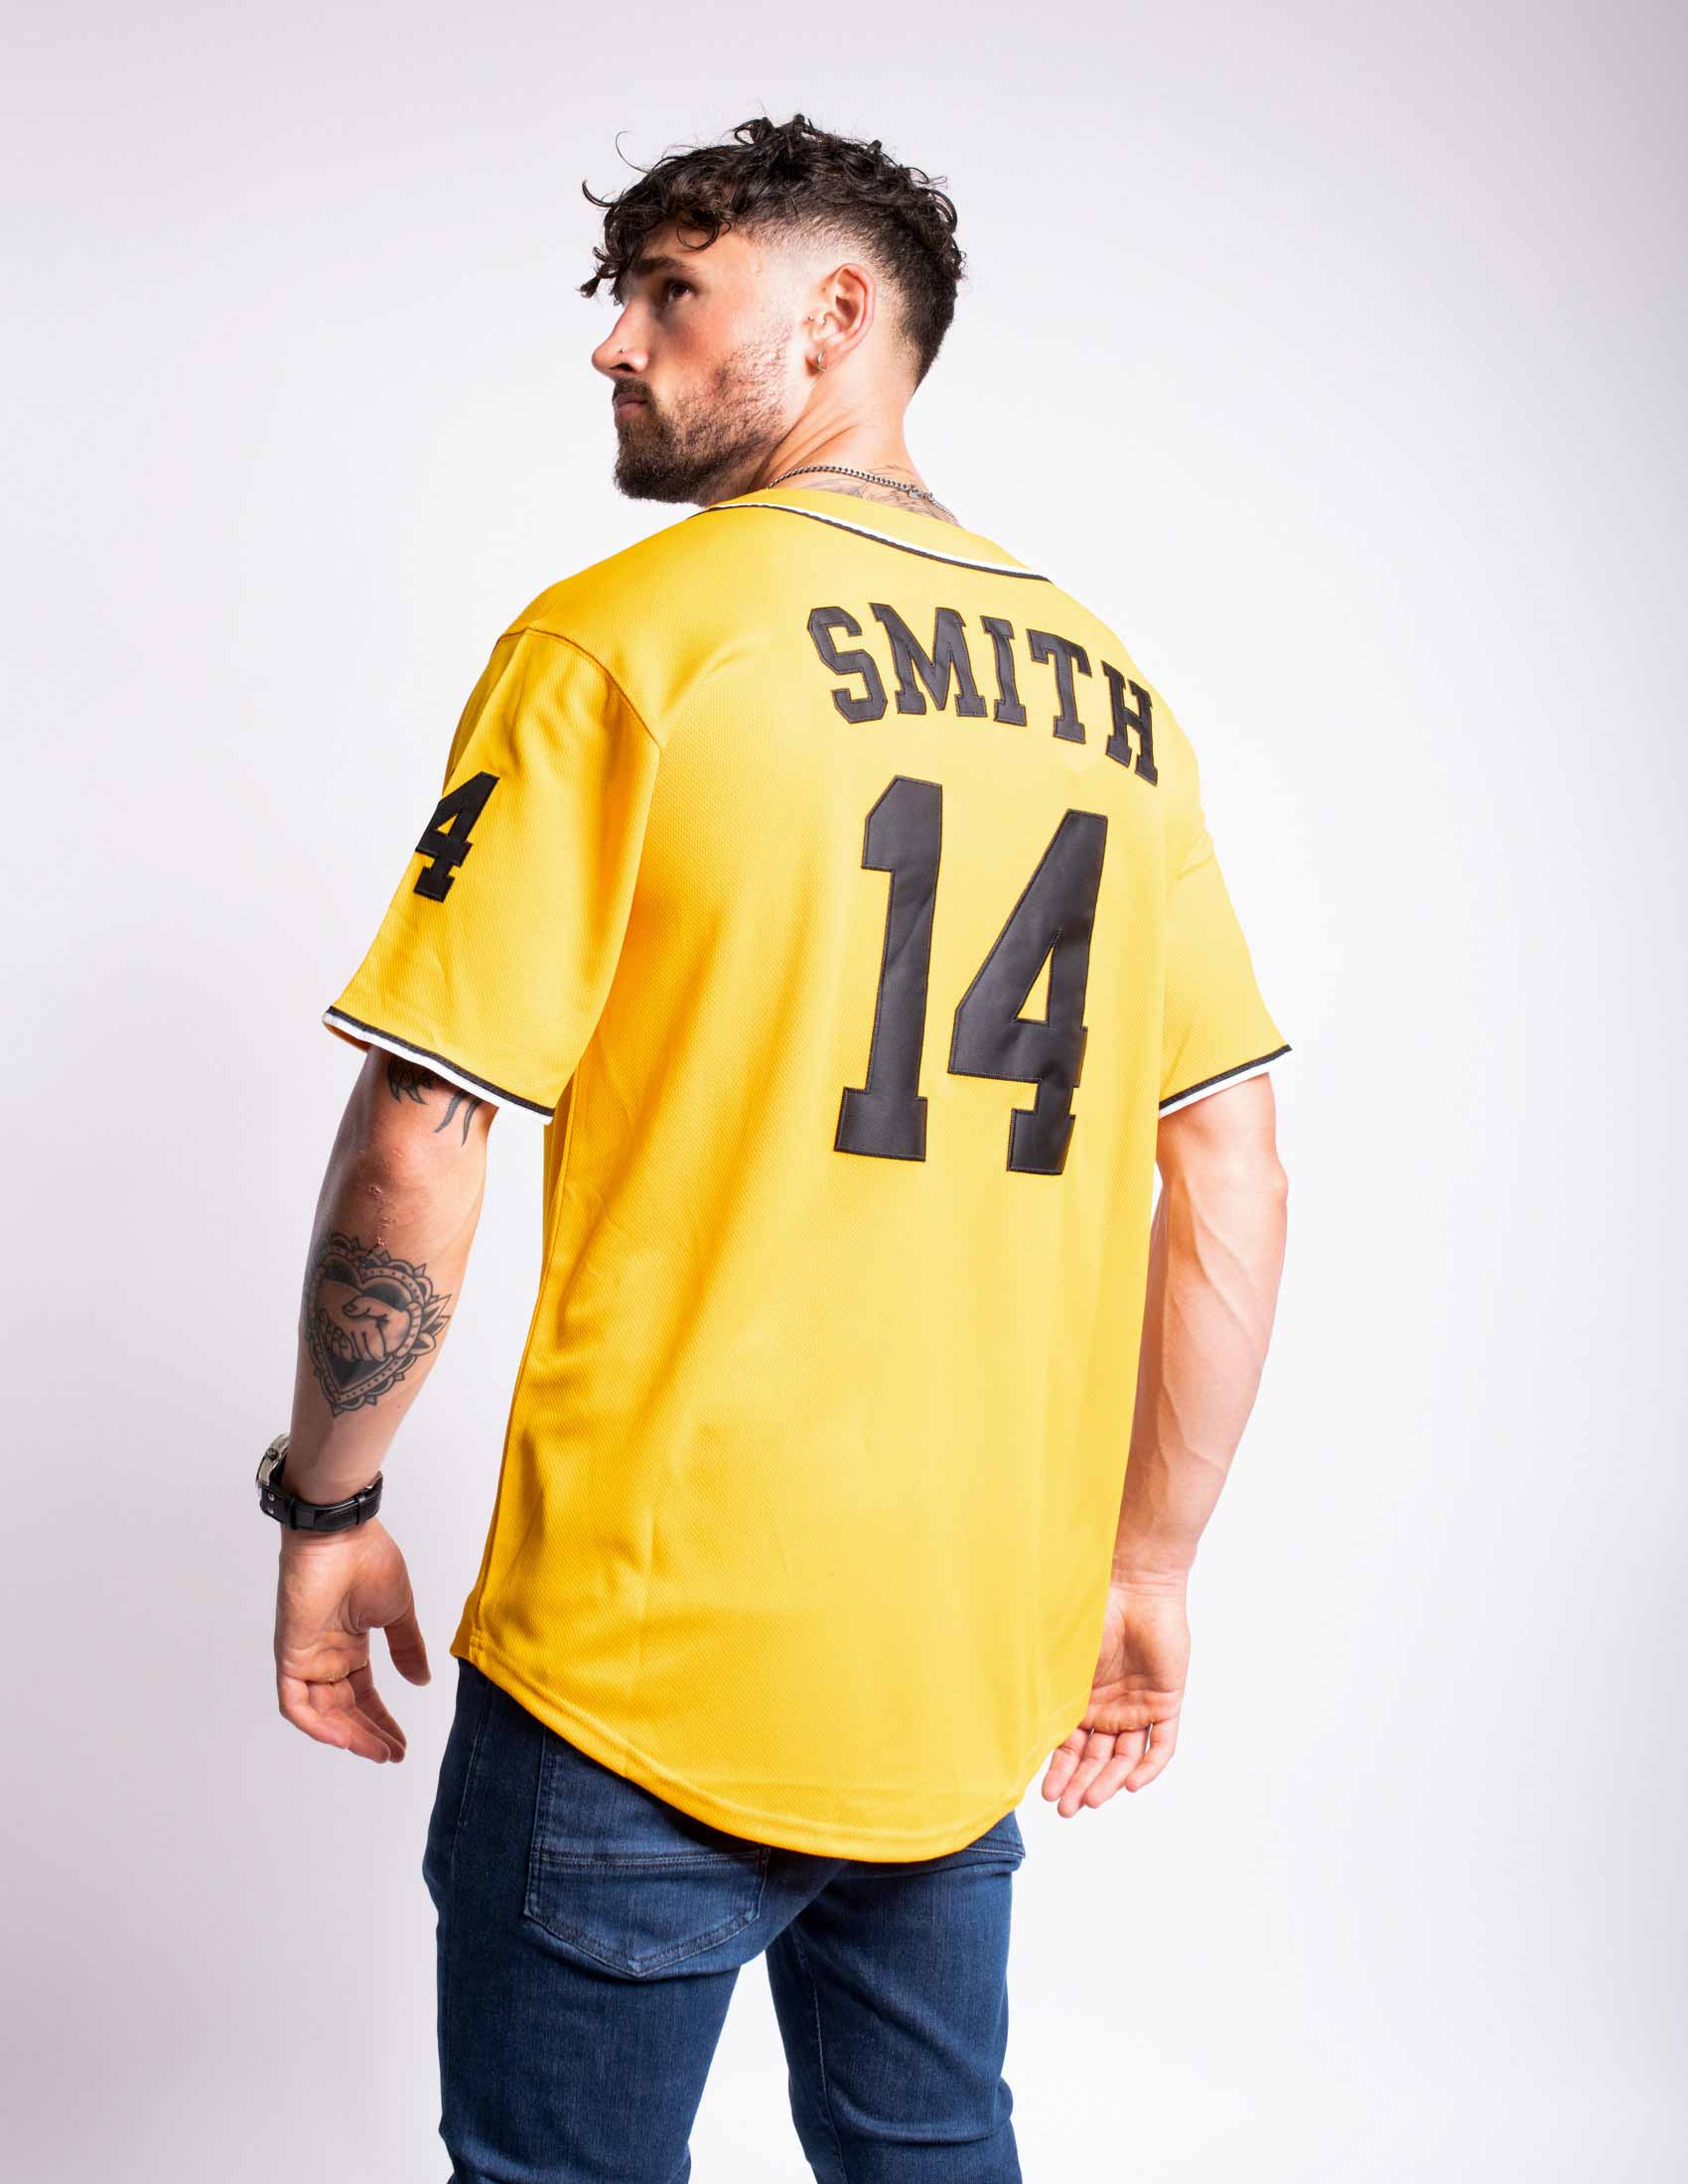 Will Smith #14 Bel-Air Academy Baseball Jersey – 99Jersey®: Your